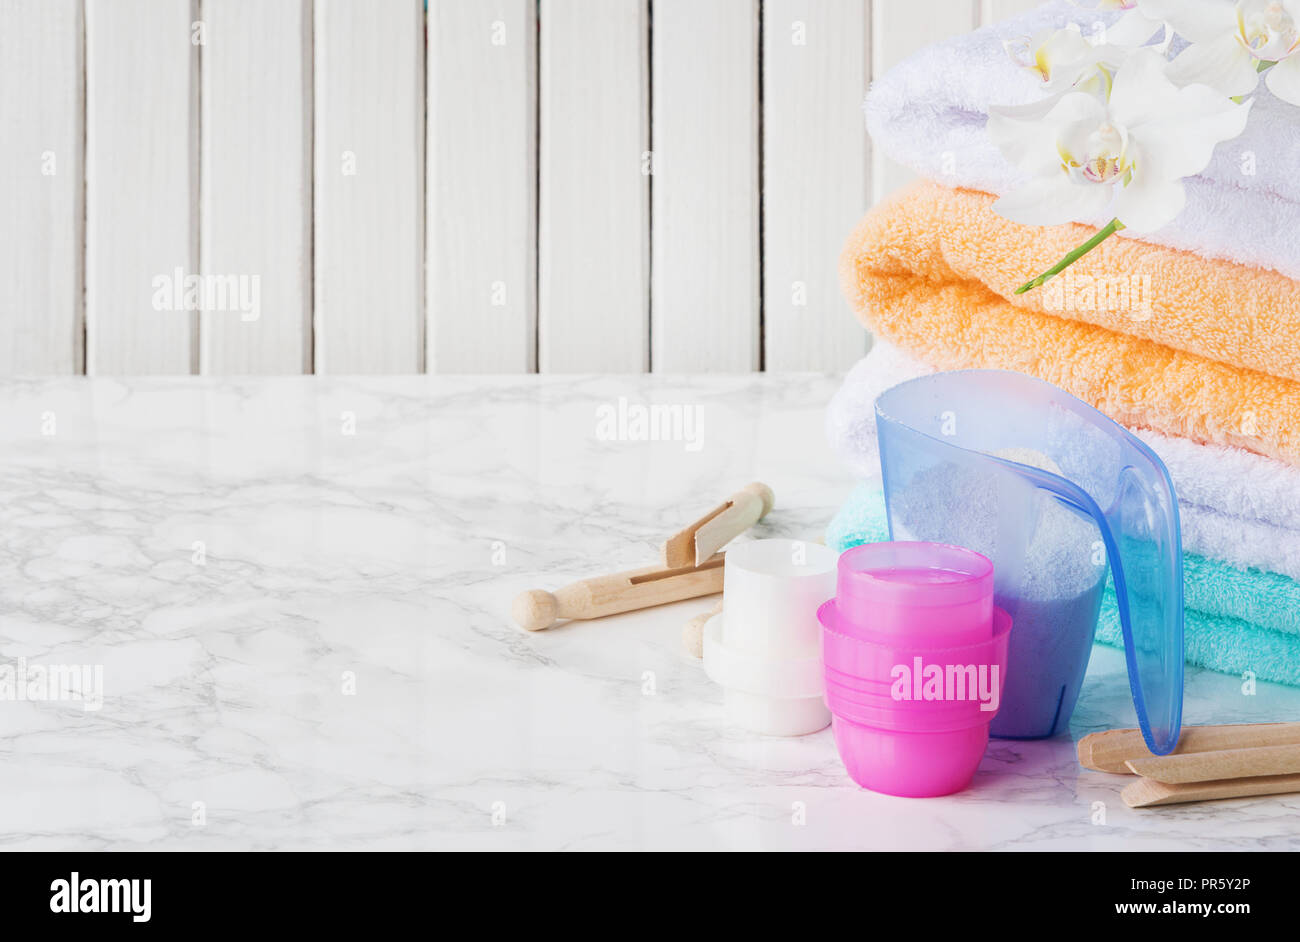 Blue plastic measuring vessel with washing powder, containers with detergent, stack of white terry towels, wooden clothespins and white orchid flower  Stock Photo